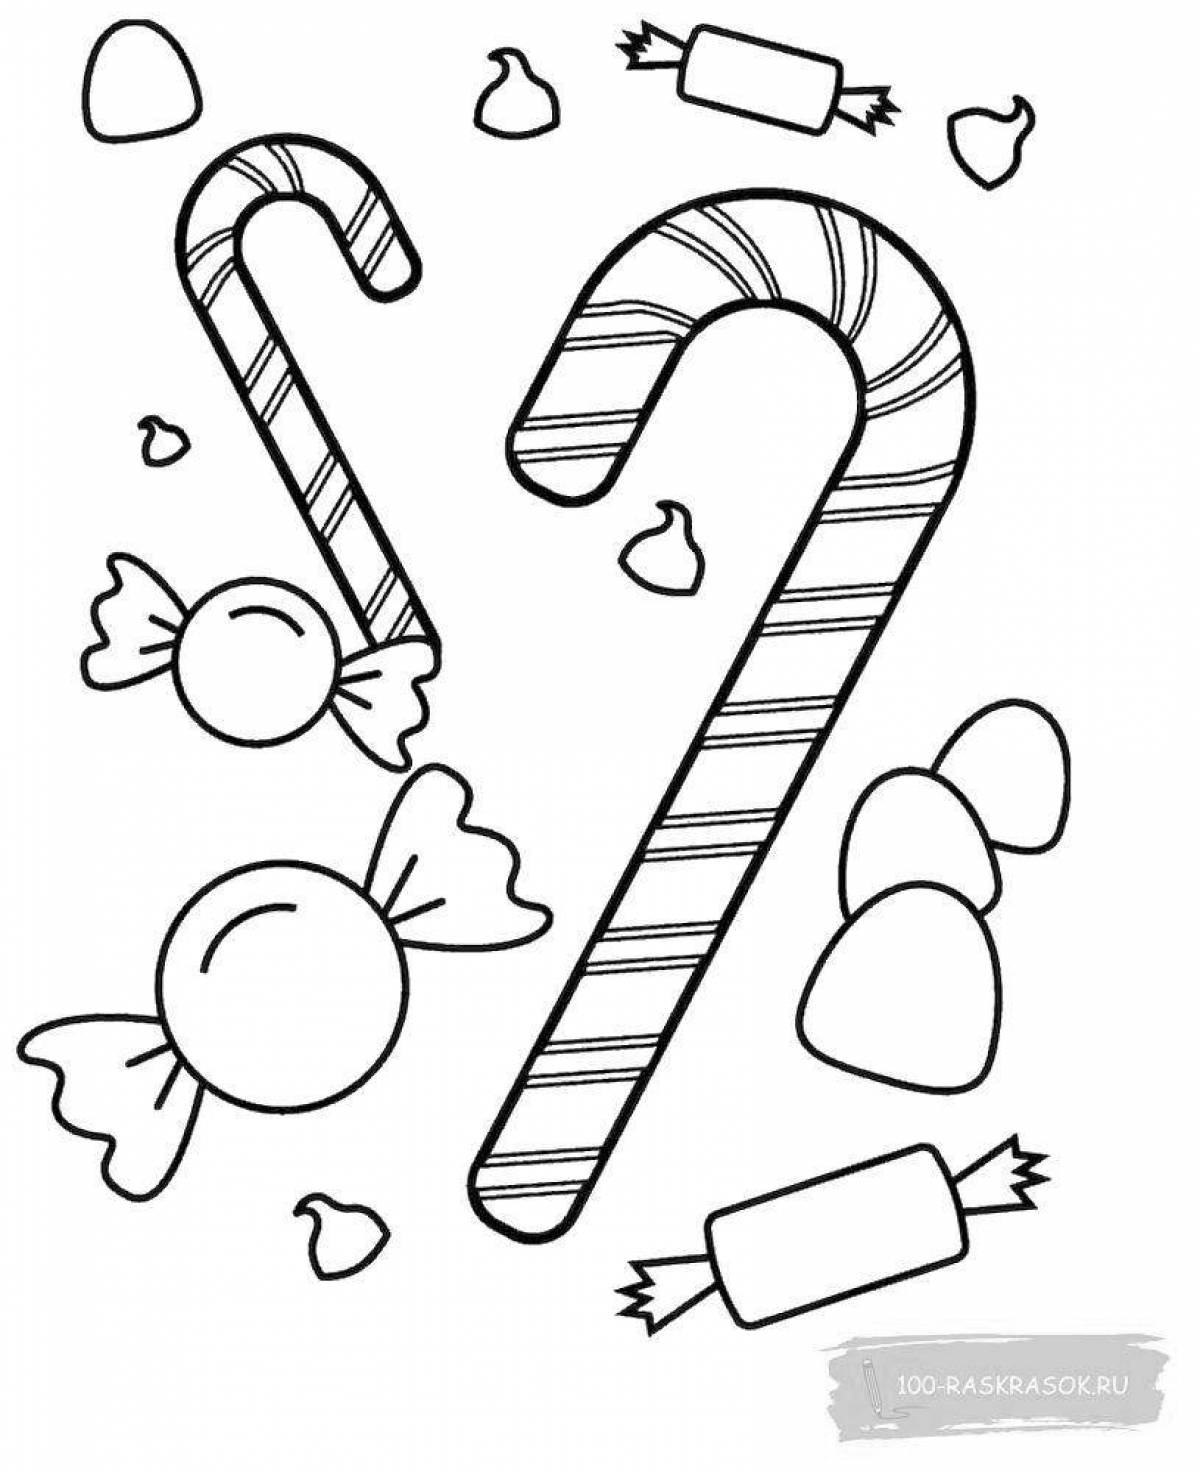 Playful candy coloring page for kids